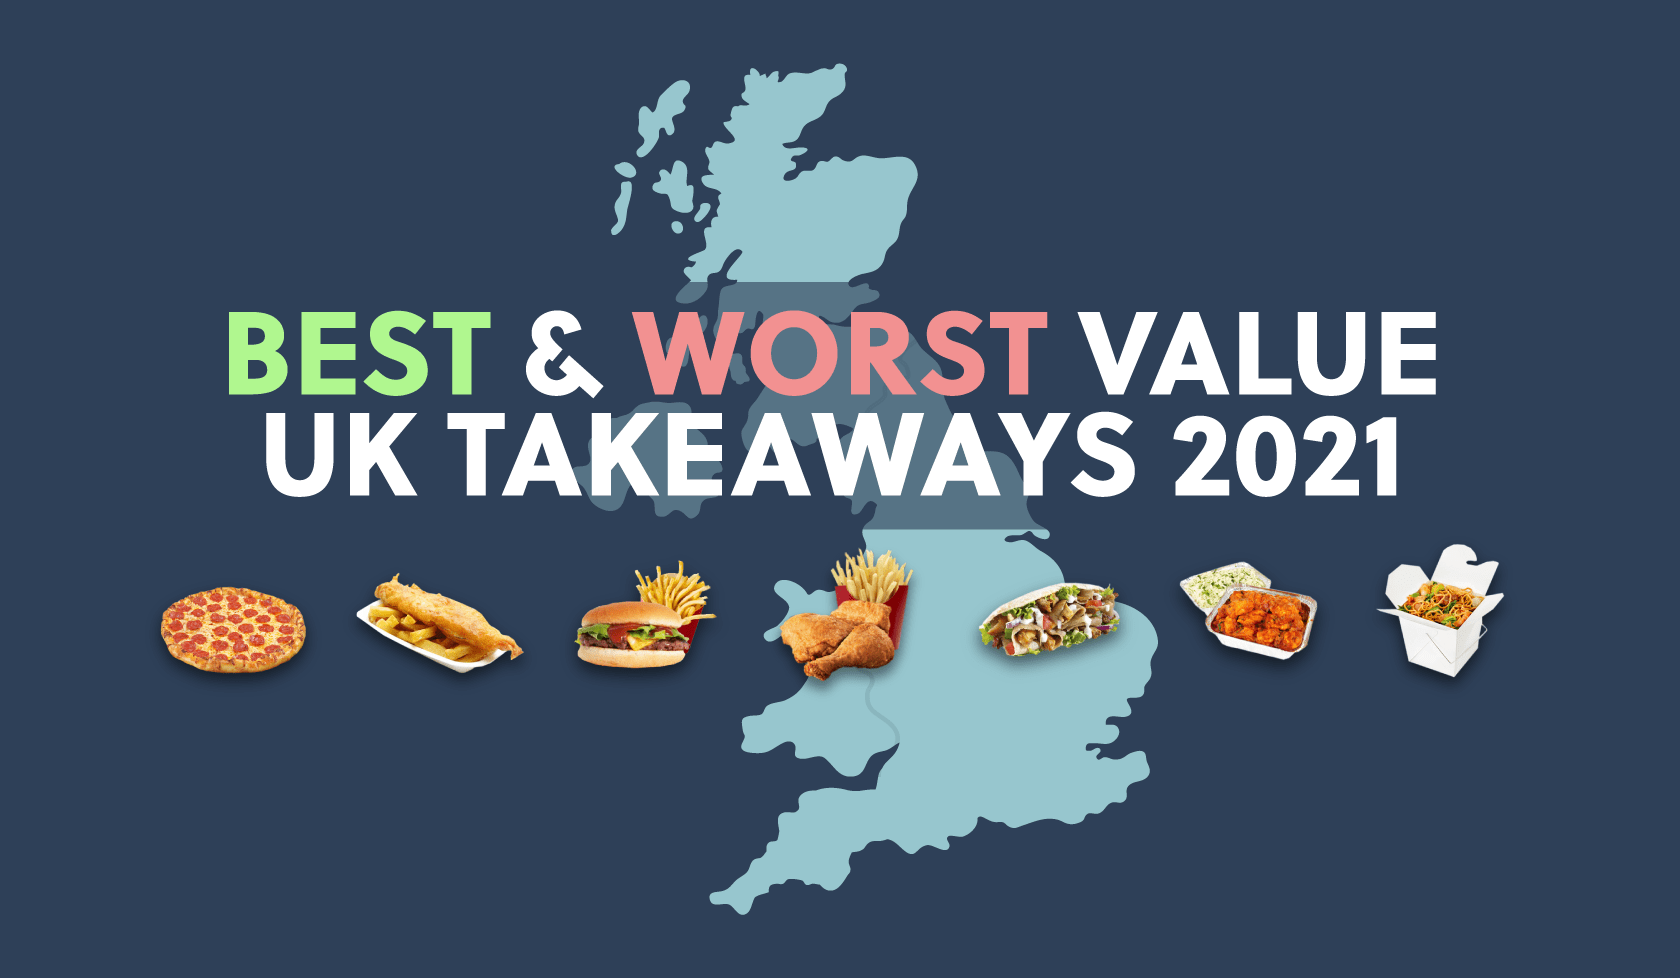 The Best & Worst Value Takeaways in the UK 2021